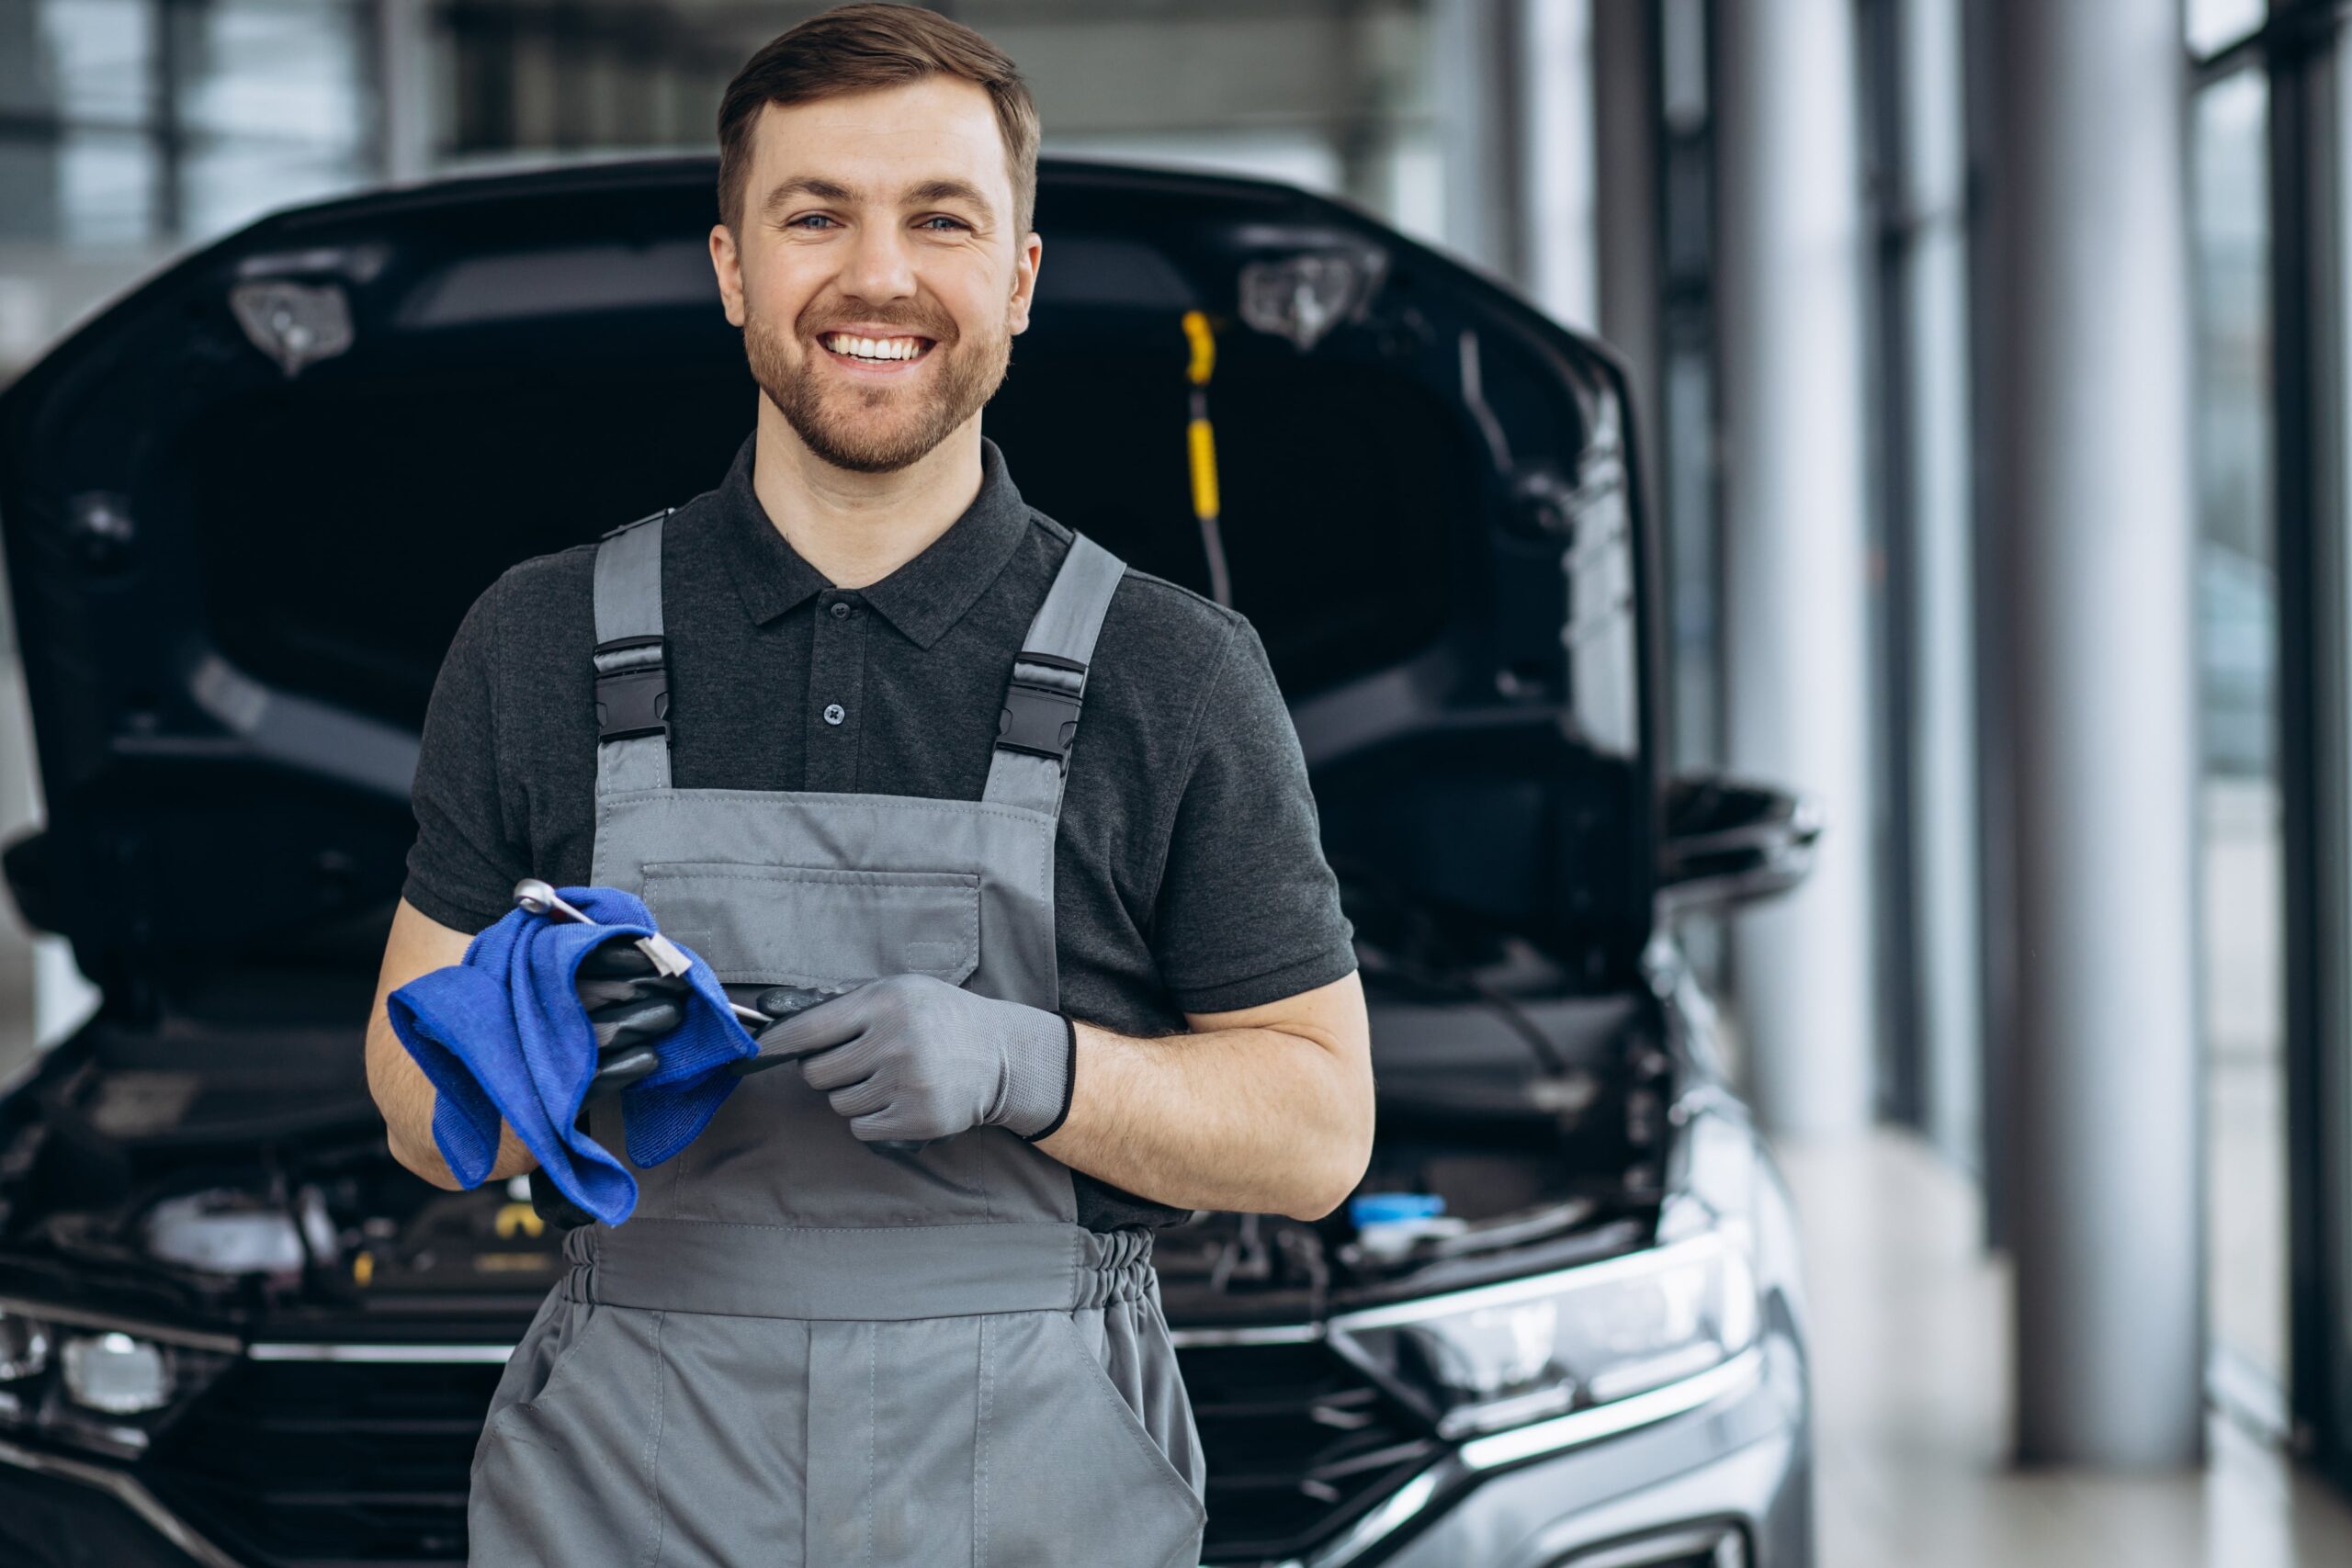 Top Car Servicing Tips Every Owner Should Know